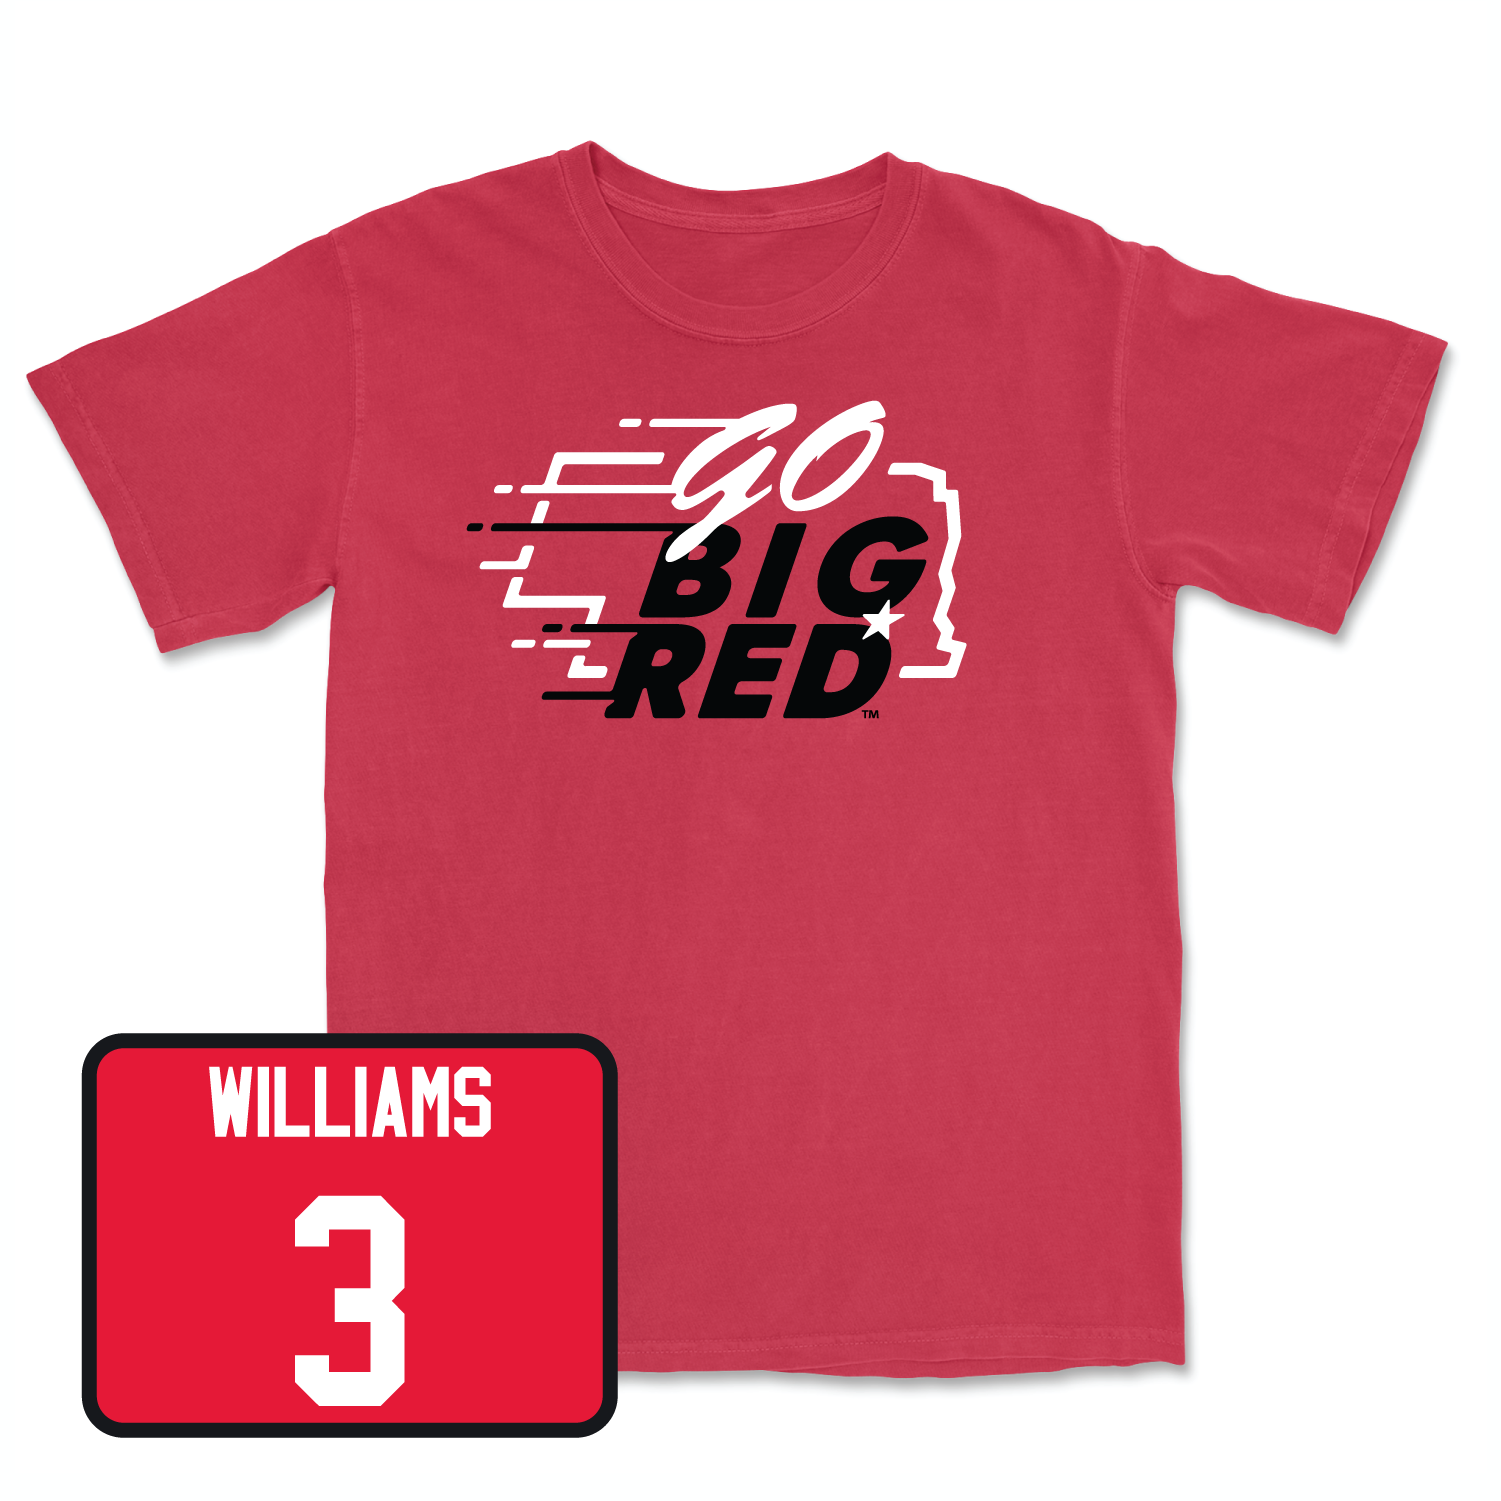 Red Men's Basketball GBR Tee 3X-Large / Brice Williams | #3